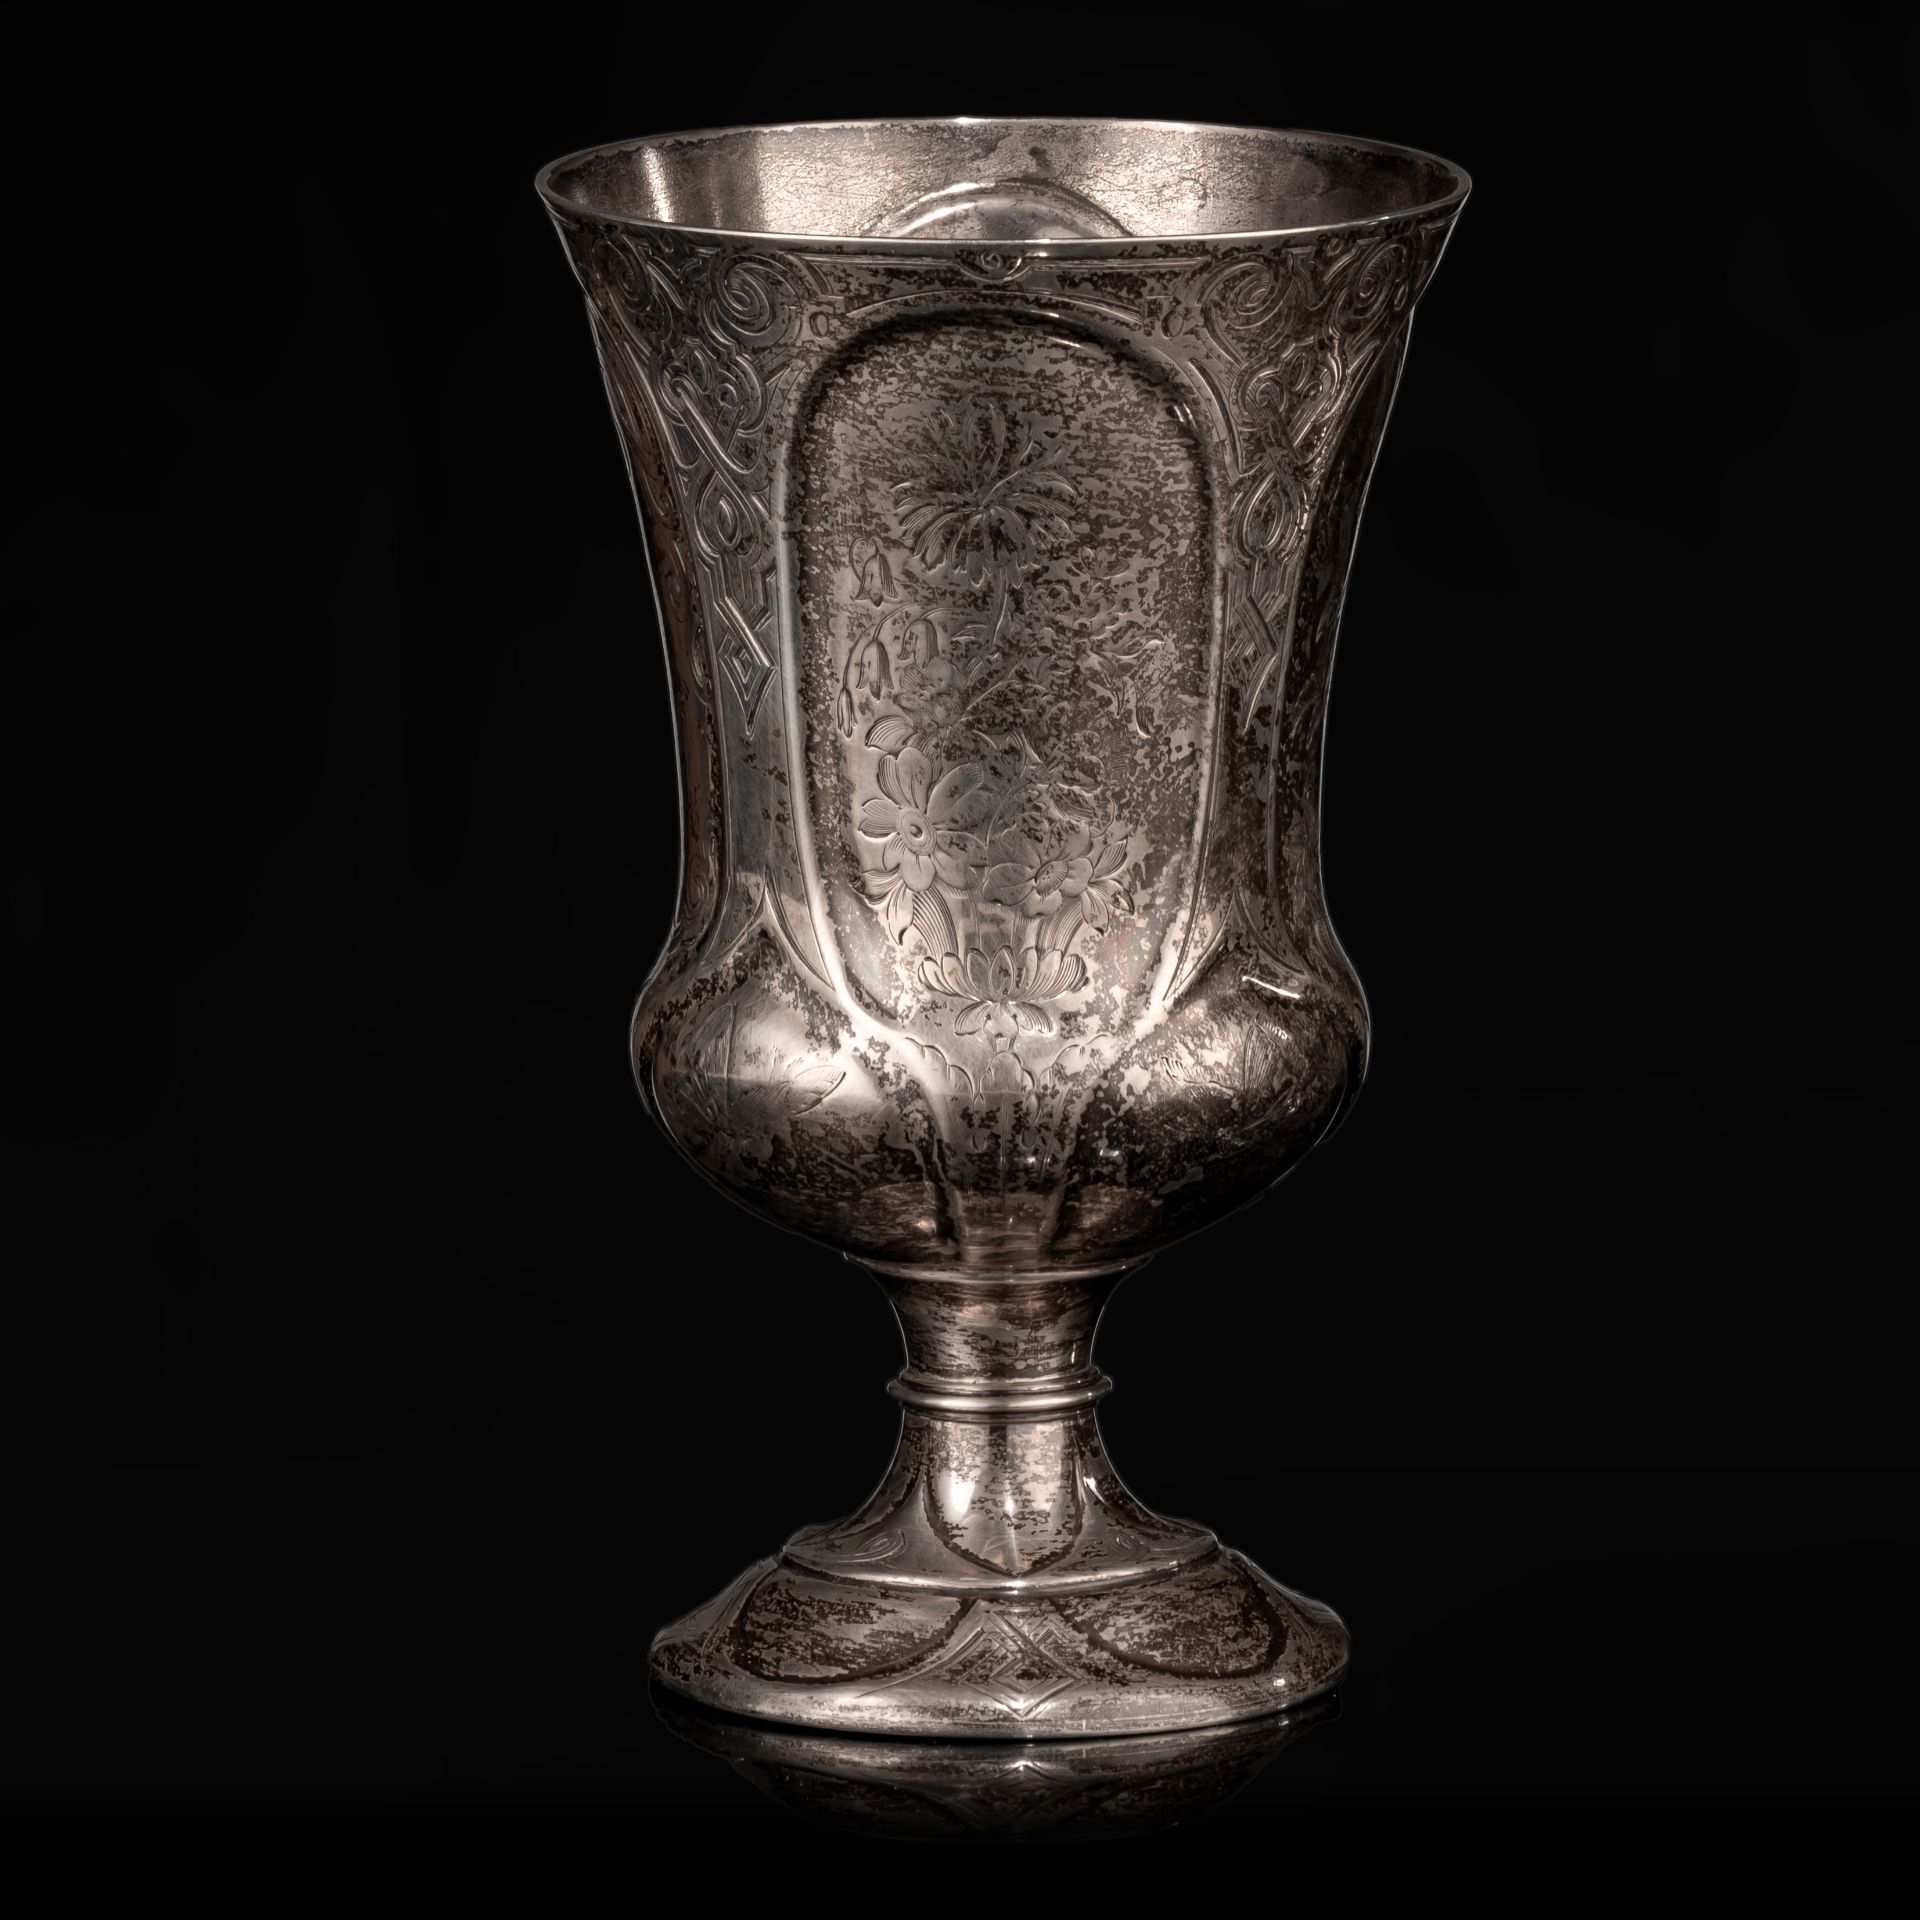 A various collection of silver, H 15,3 - 20 cm, total weight: 945 g - Image 9 of 20